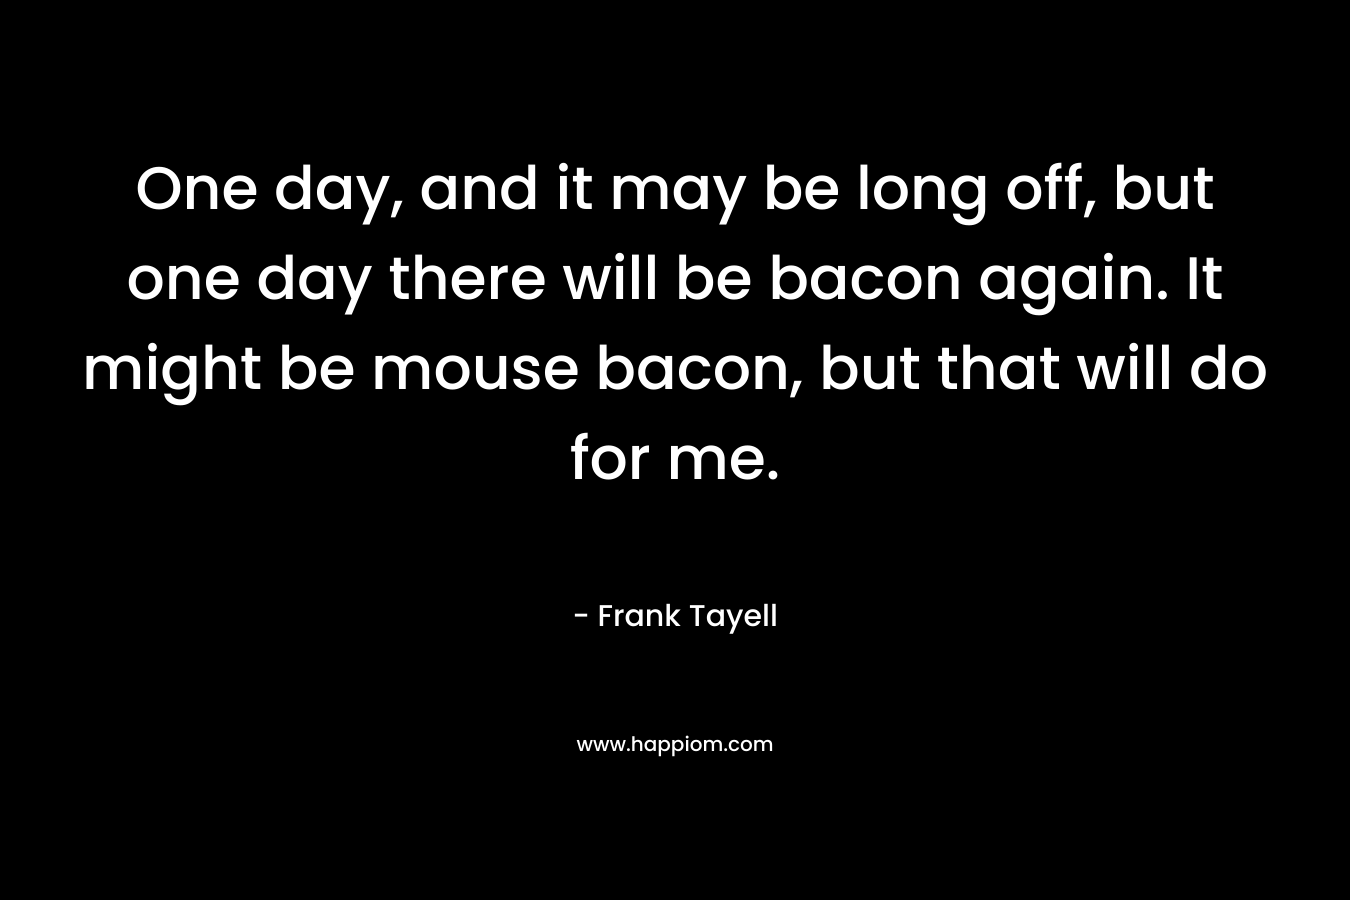 One day, and it may be long off, but one day there will be bacon again. It might be mouse bacon, but that will do for me. – Frank Tayell